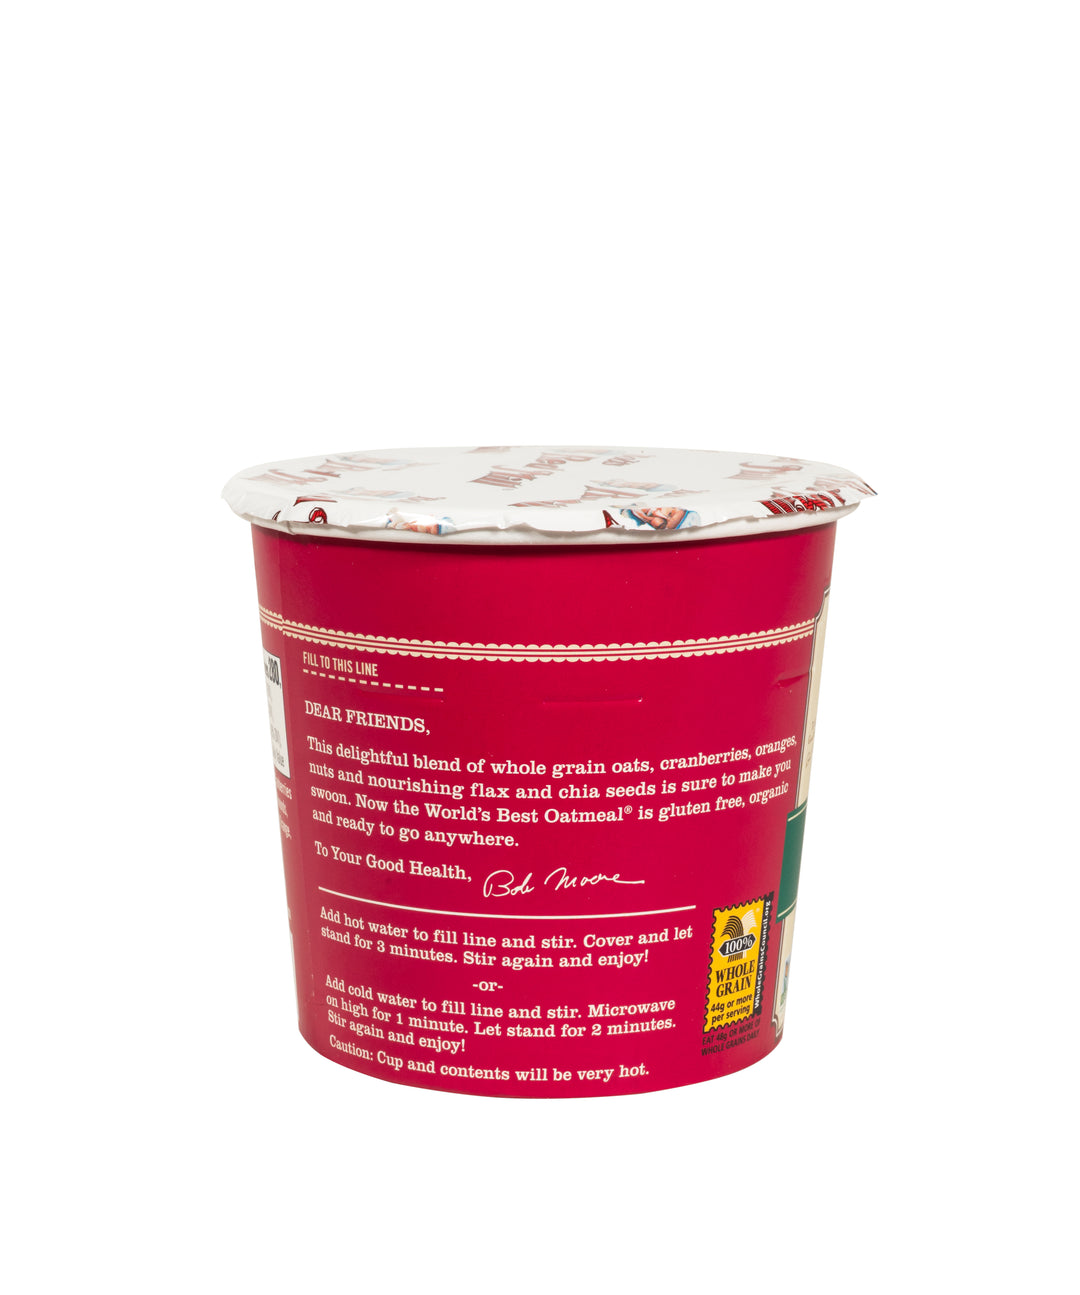 Bob's Red Mill Natural Foods Inc Organic Gluten Free Orange Cranberry Oatmeal Cup-2.47 oz.-12/Case